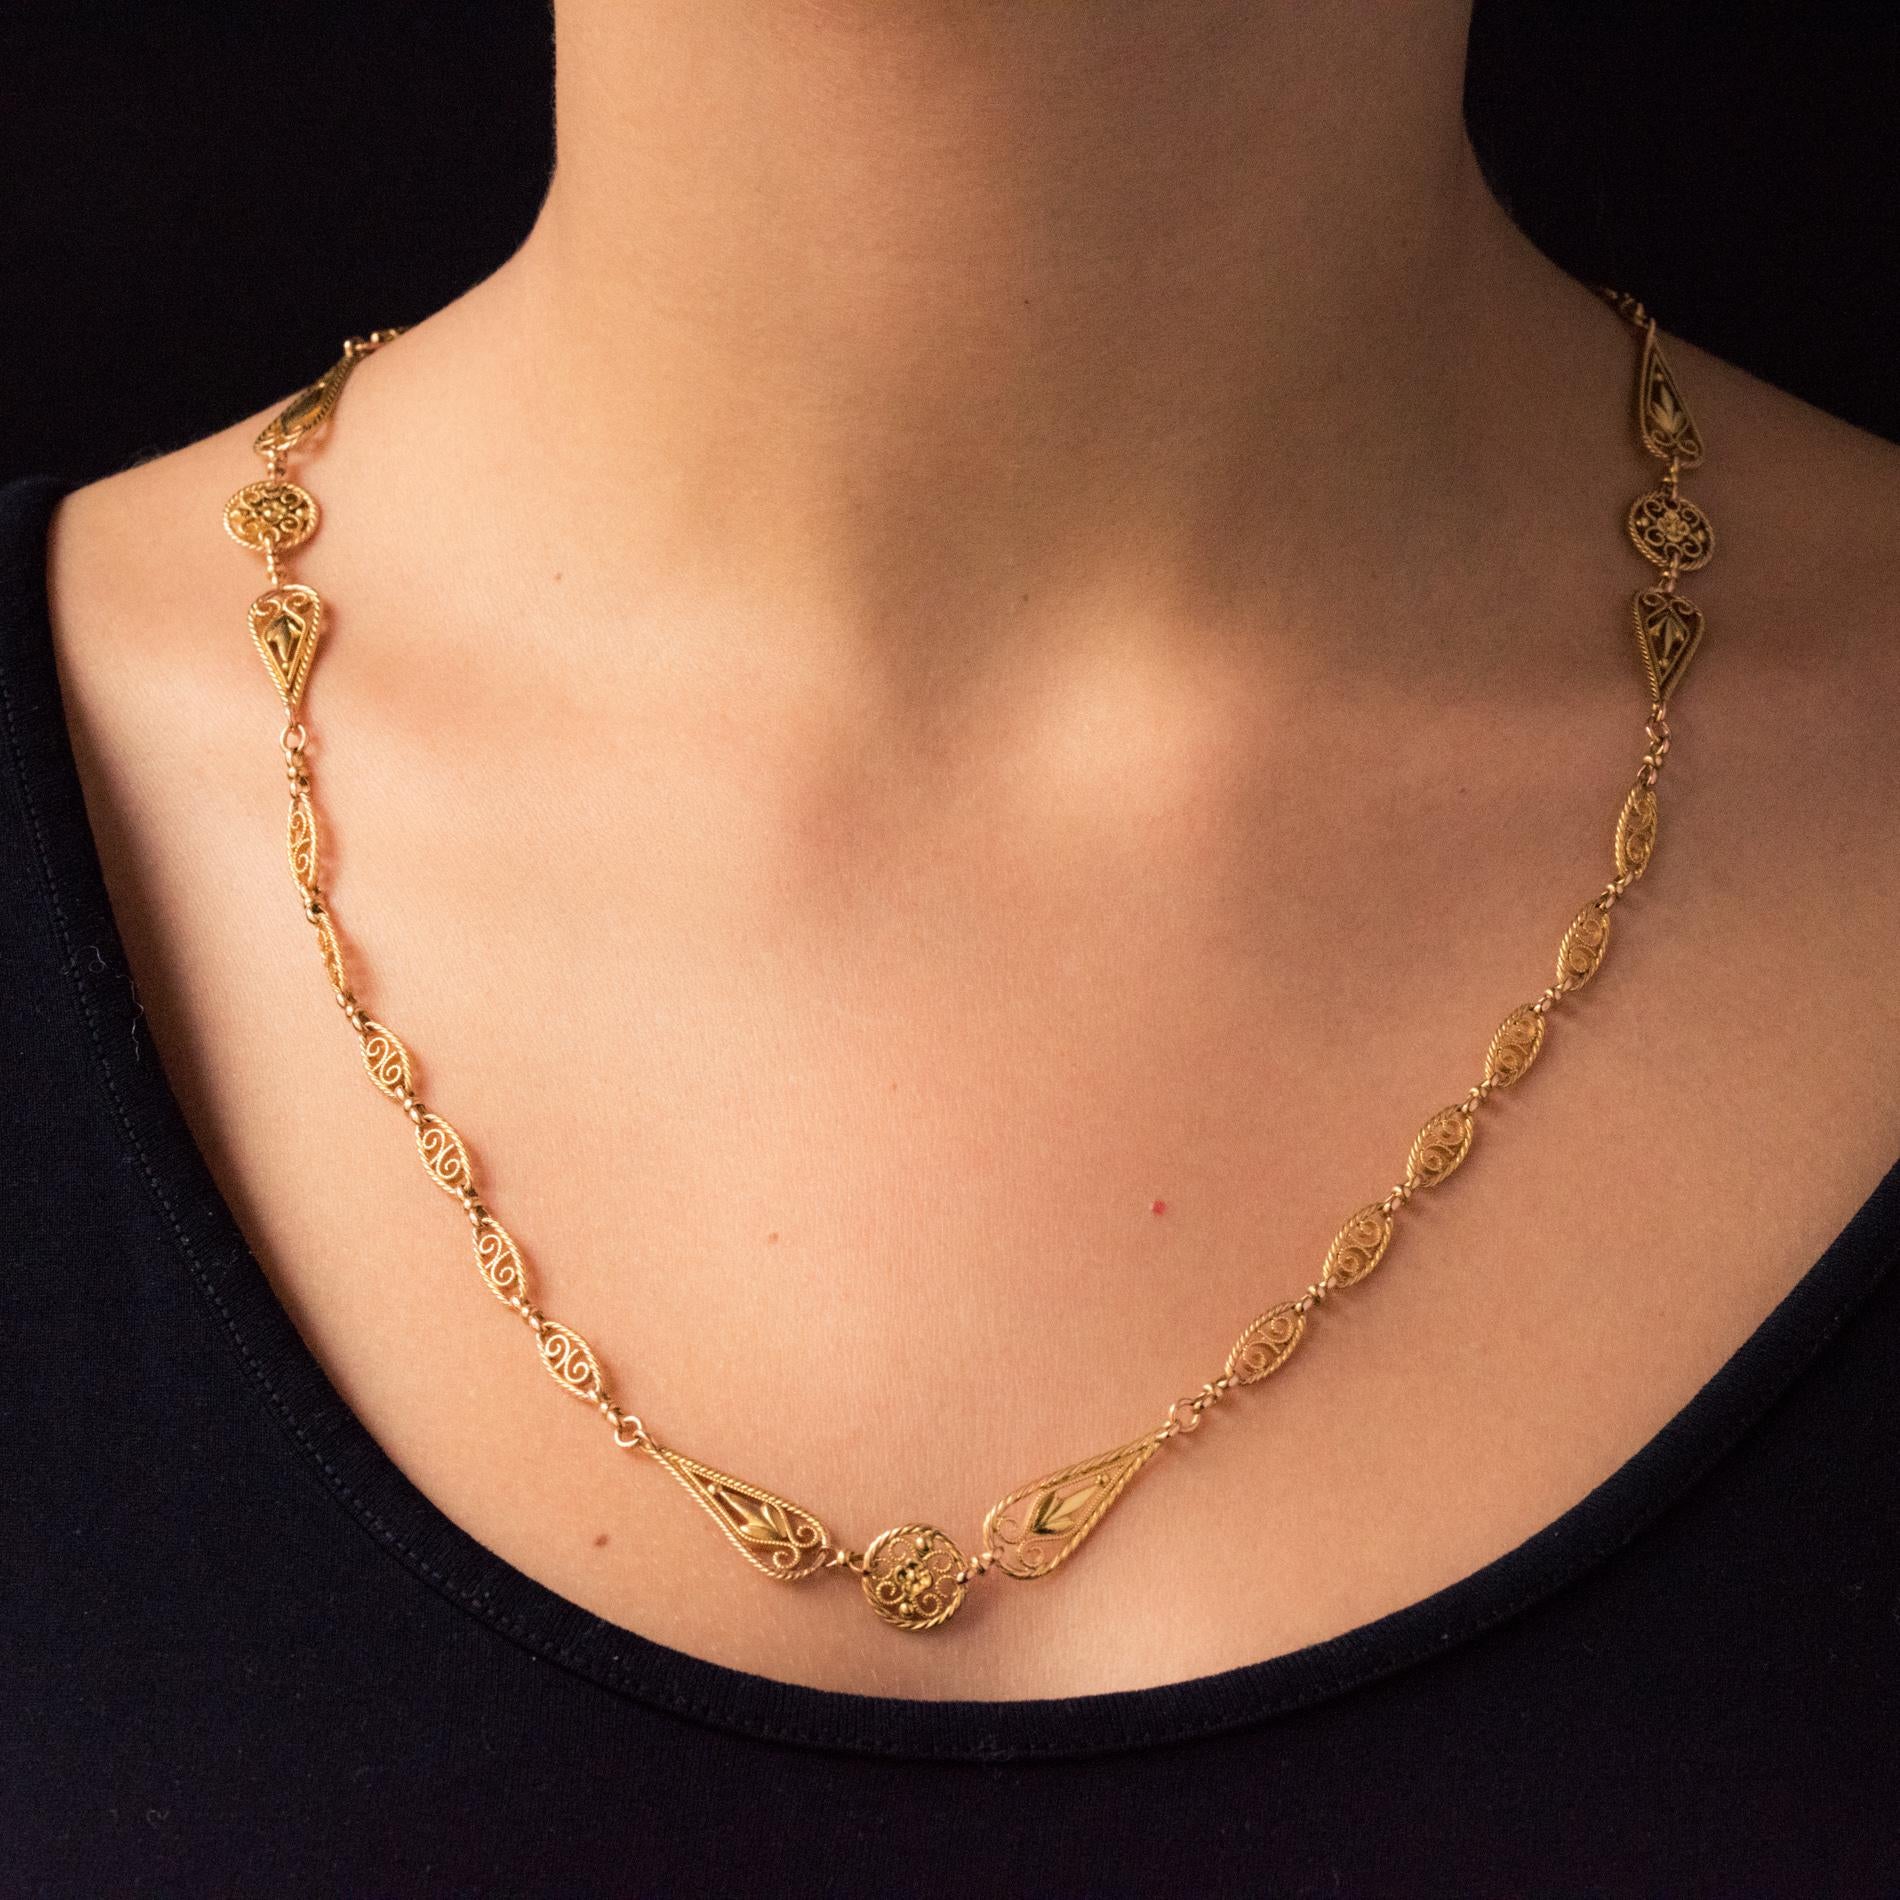 Chain in 18 karat yellow gold, horse's head hallmark.
Elegant antique necklace, it consists of filigree openwork shuttle links, separated by disks of the same pattern and each supported by 2 openwork pear links. The clip is a spring ring.
Length: 59